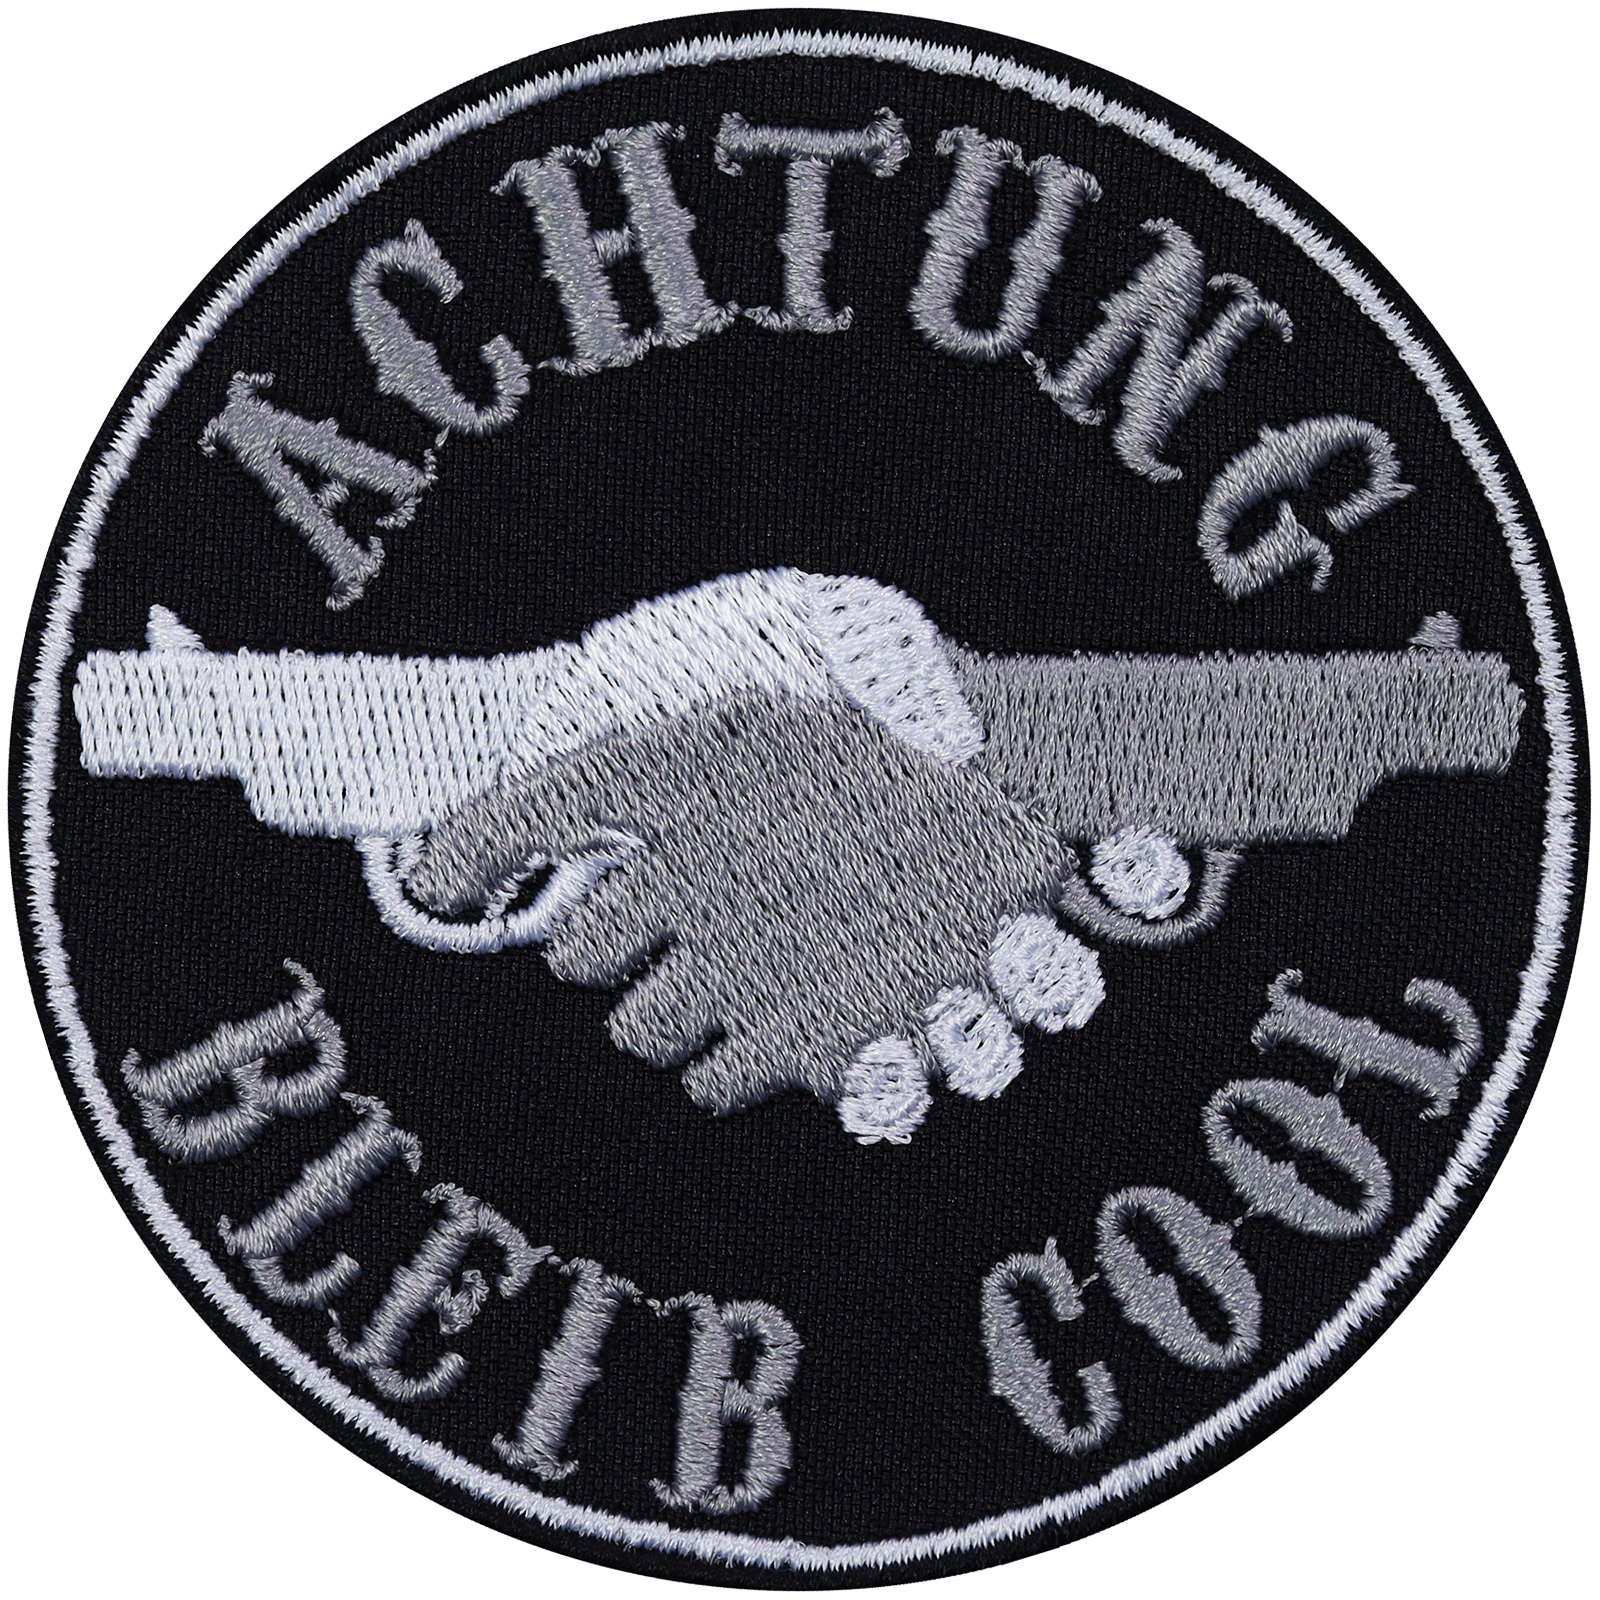 Achtung bleib cool - Patch